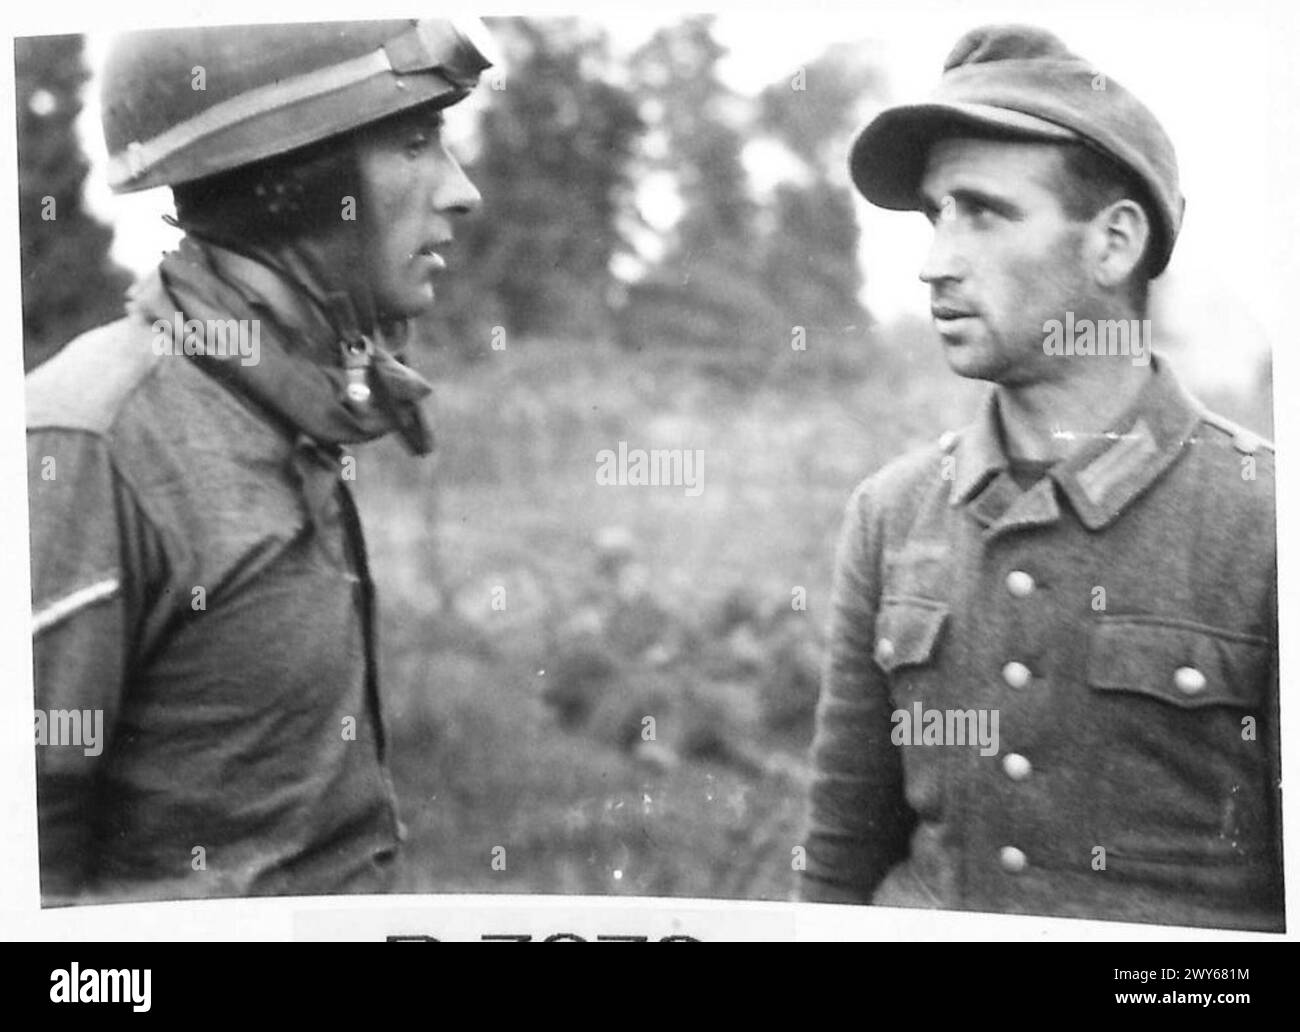 TYPES OF PRISONERS CAPTURED - A Polish prisoner who gave himself up, Felike Wenzez of Grunberg, Poland. His brother was killed fighting in the Russian Army and his best friend is in the Polish Air Force in England. , British Army, 21st Army Group Stock Photo